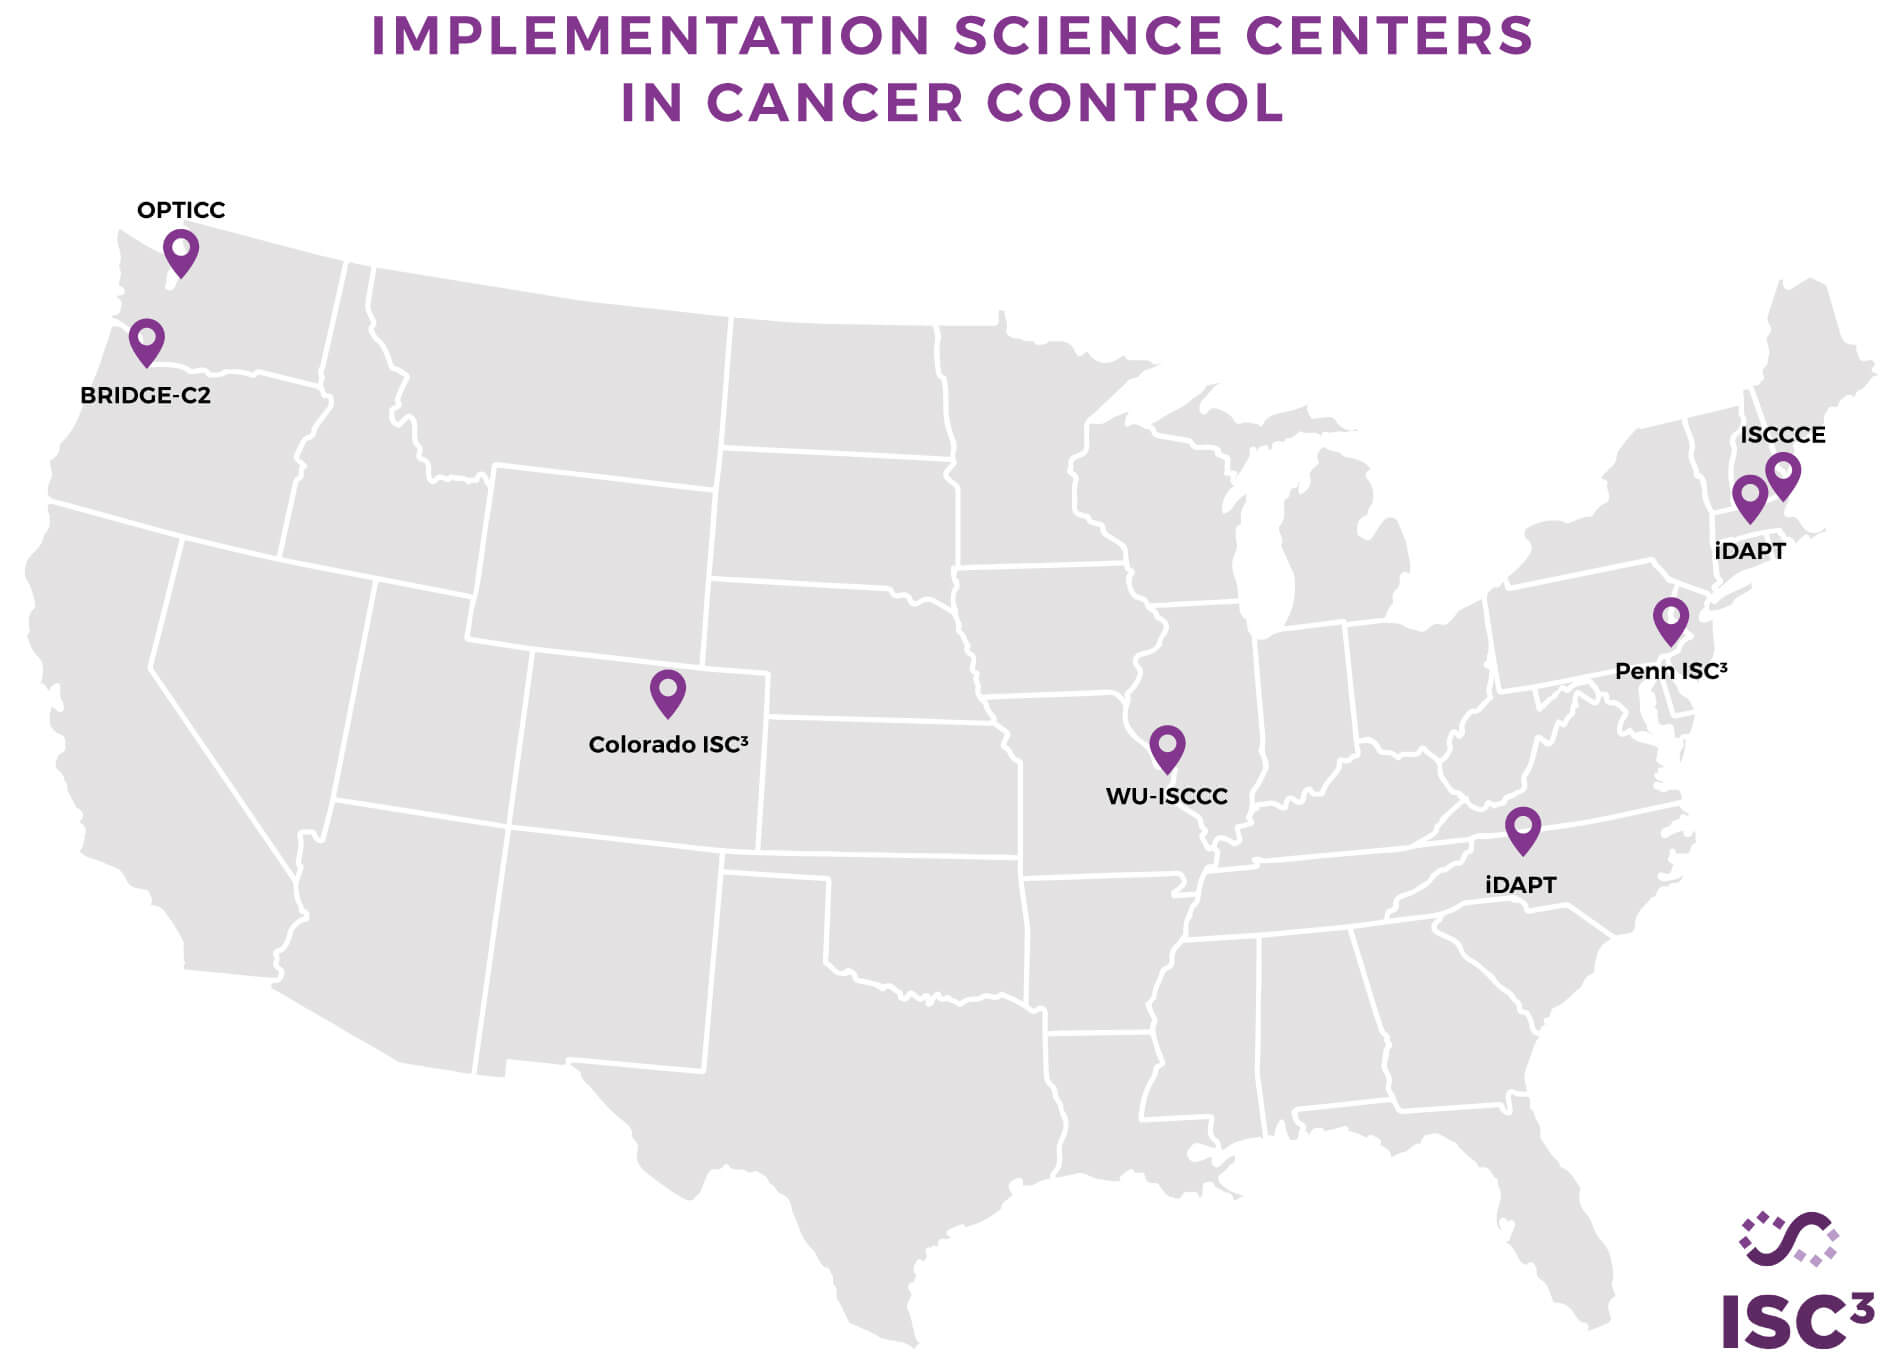 The Implementation Science Centers in Cancer Control (ISC3) Program Map